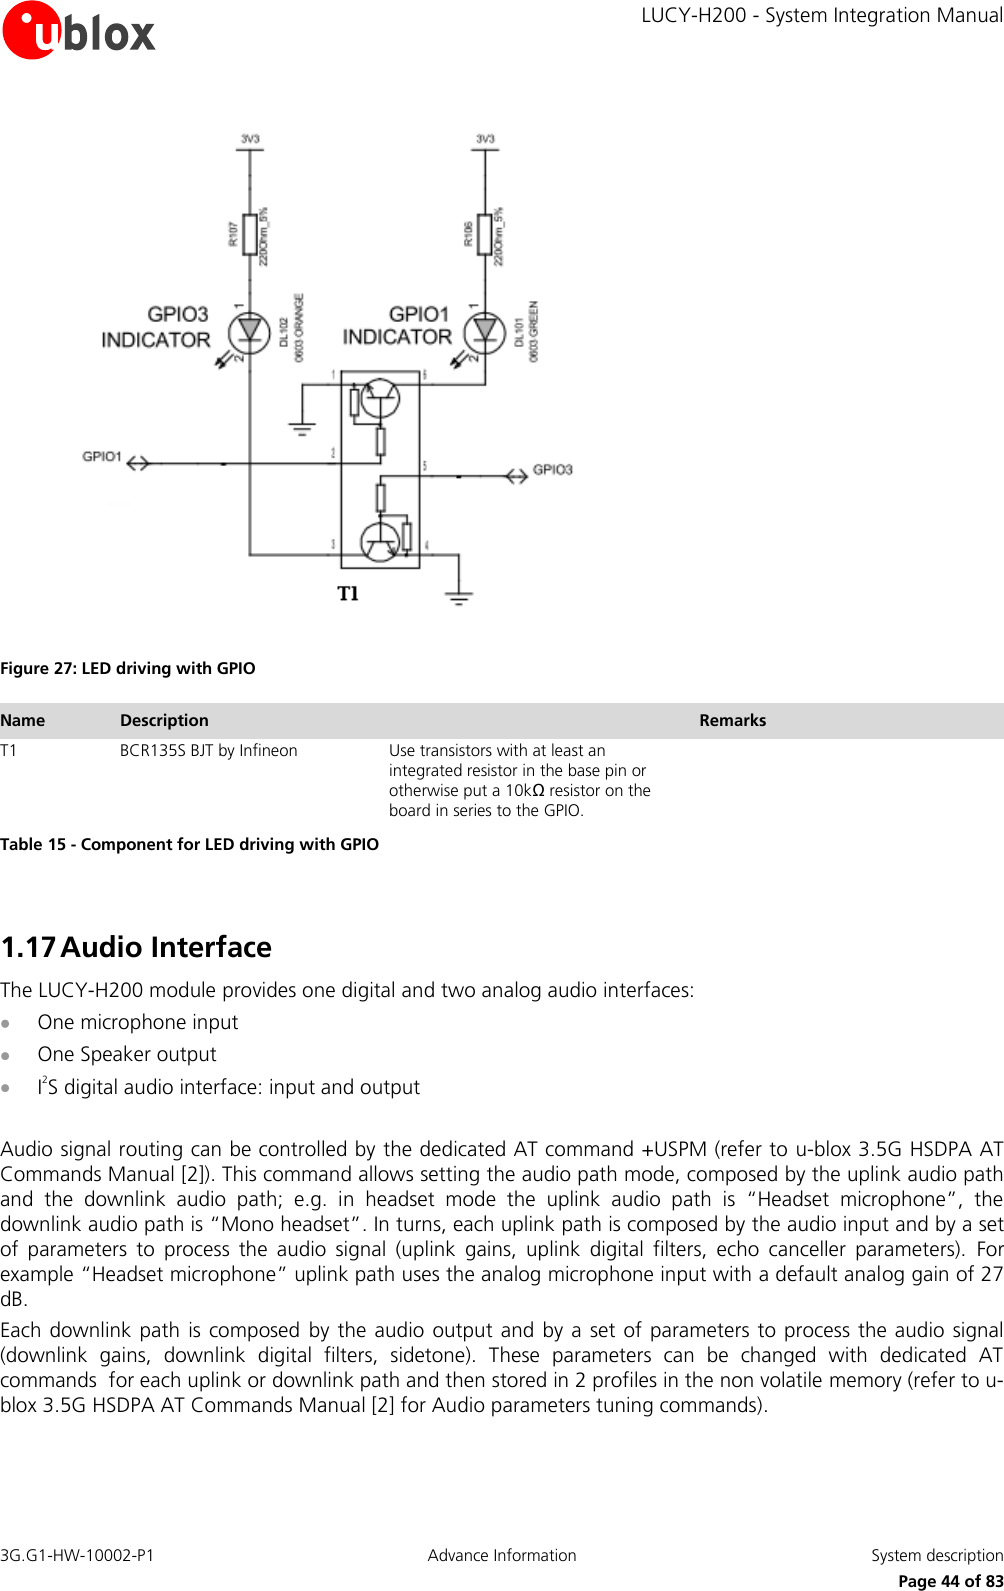     LUCY-H200 - System Integration Manual 3G.G1-HW-10002-P1  Advance Information  System description      Page 44 of 83  Figure 27: LED driving with GPIO Name Description Remarks T1 BCR135S BJT by Infineon Use transistors with at least an integrated resistor in the base pin or otherwise put a 10kΩ resistor on the board in series to the GPIO. Table 15 - Component for LED driving with GPIO  1.17 Audio Interface The LUCY-H200 module provides one digital and two analog audio interfaces:  One microphone input  One Speaker output  I2S digital audio interface: input and output  Audio signal routing can be controlled by the dedicated AT command +USPM (refer to u-blox 3.5G HSDPA AT Commands Manual [2]). This command allows setting the audio path mode, composed by the uplink audio path and  the  downlink  audio  path;  e.g.  in  headset  mode  the  uplink  audio  path  is  “Headset  microphone”,  the downlink audio path is “Mono headset”. In turns, each uplink path is composed by the audio input and by a set of  parameters  to  process  the  audio  signal  (uplink  gains,  uplink  digital  filters,  echo  canceller  parameters).  For example “Headset microphone” uplink path uses the analog microphone input with a default analog gain of 27 dB. Each downlink path is composed  by the audio  output  and by a  set of parameters to process the audio  signal (downlink  gains,  downlink  digital  filters,  sidetone).  These  parameters  can  be  changed  with  dedicated  AT commands  for each uplink or downlink path and then stored in 2 profiles in the non volatile memory (refer to u-blox 3.5G HSDPA AT Commands Manual [2] for Audio parameters tuning commands).  